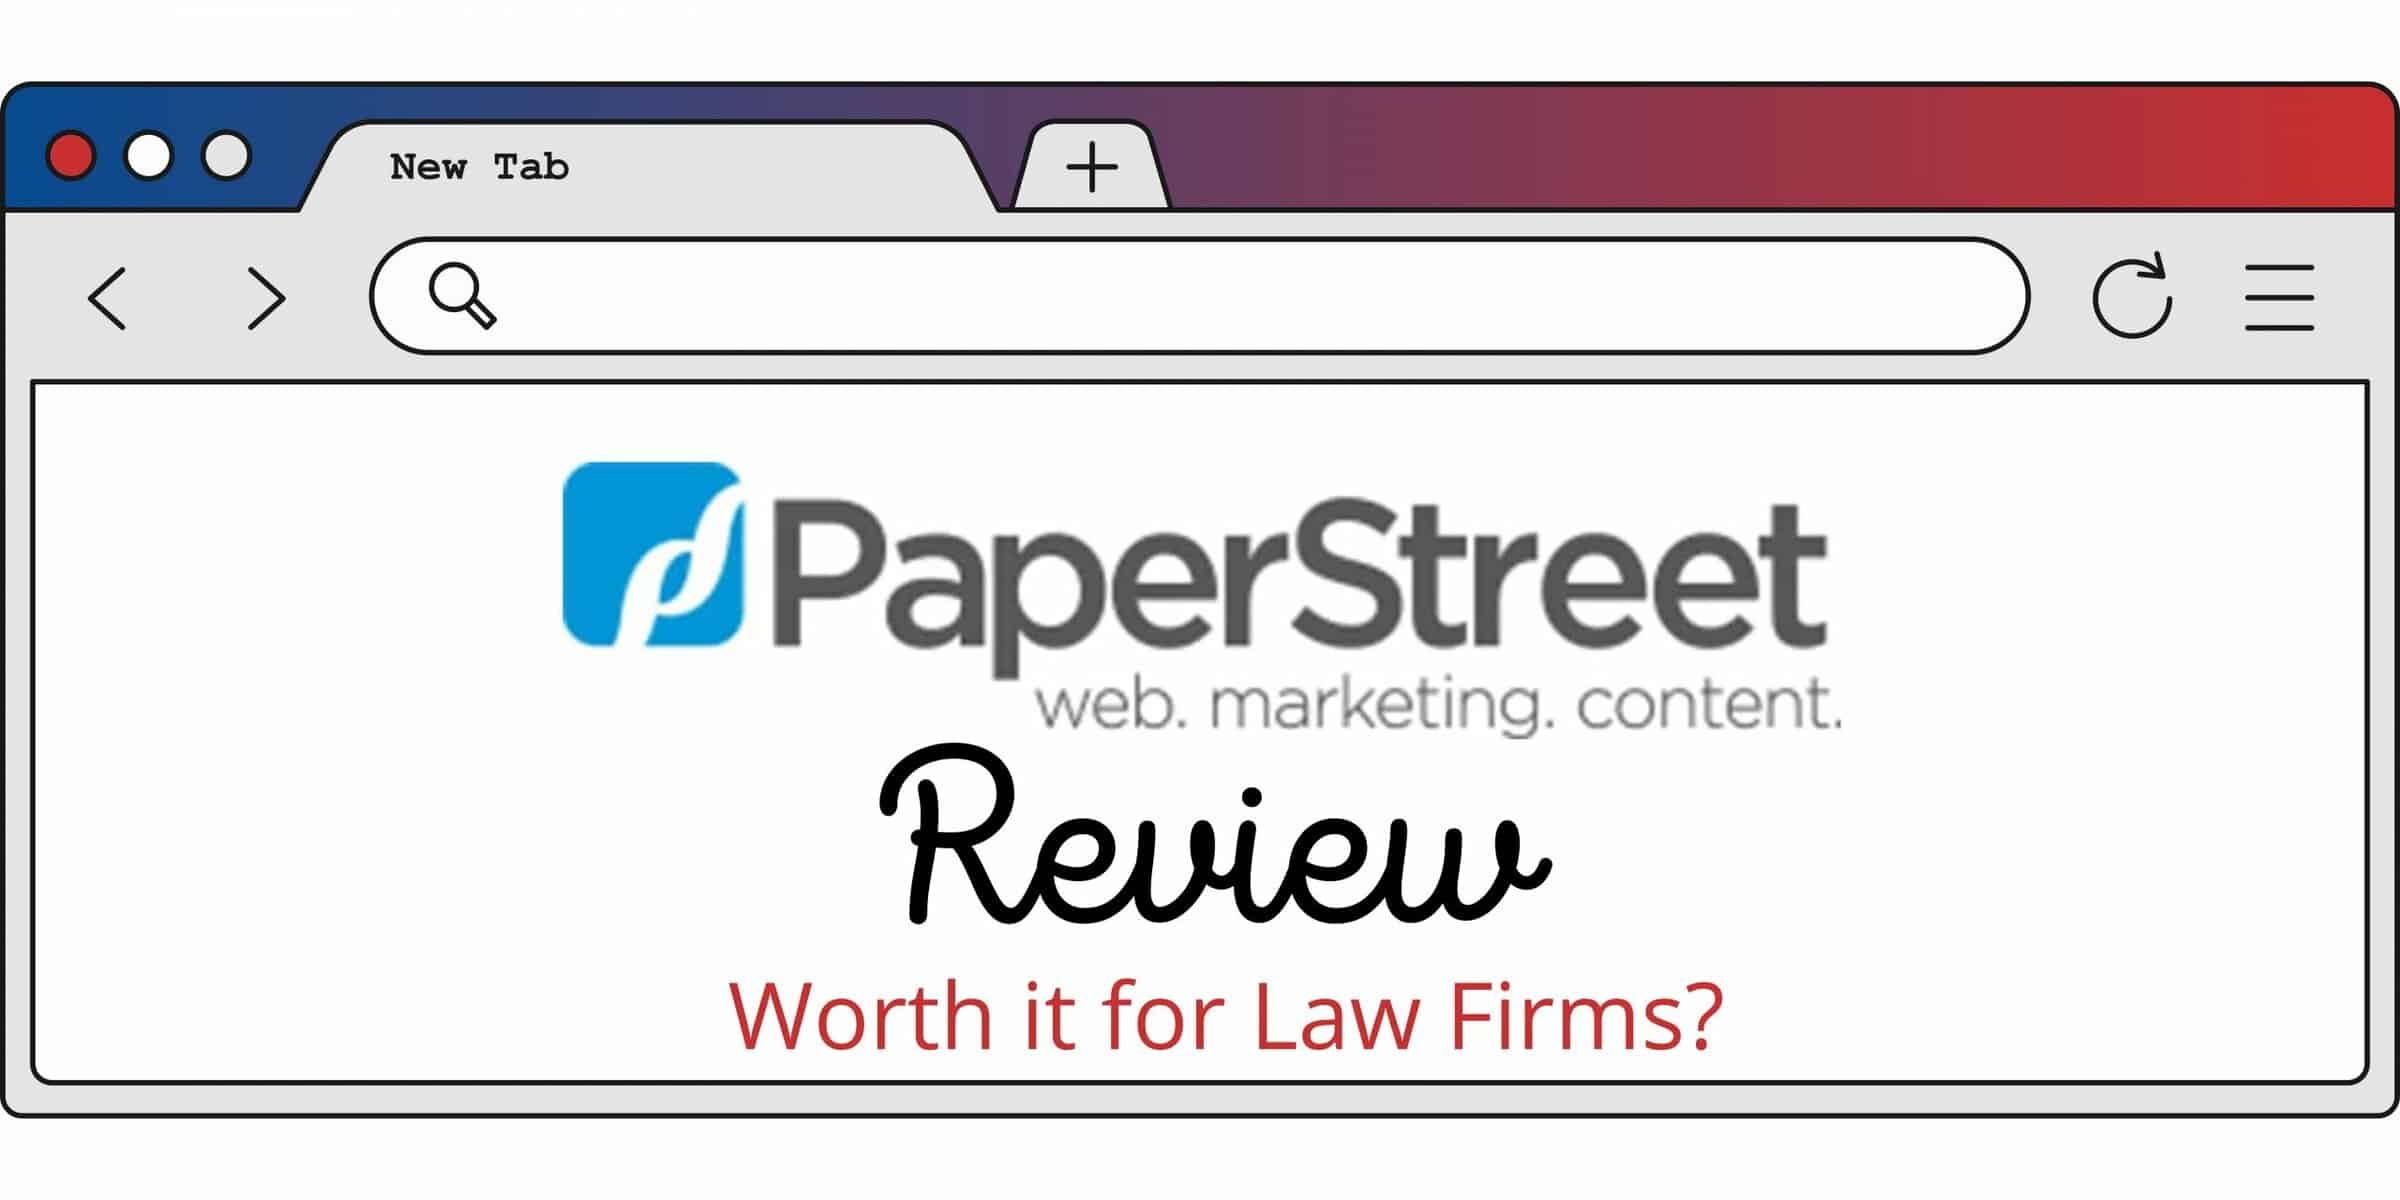 PaperStreet Review Marketing for Law Firms